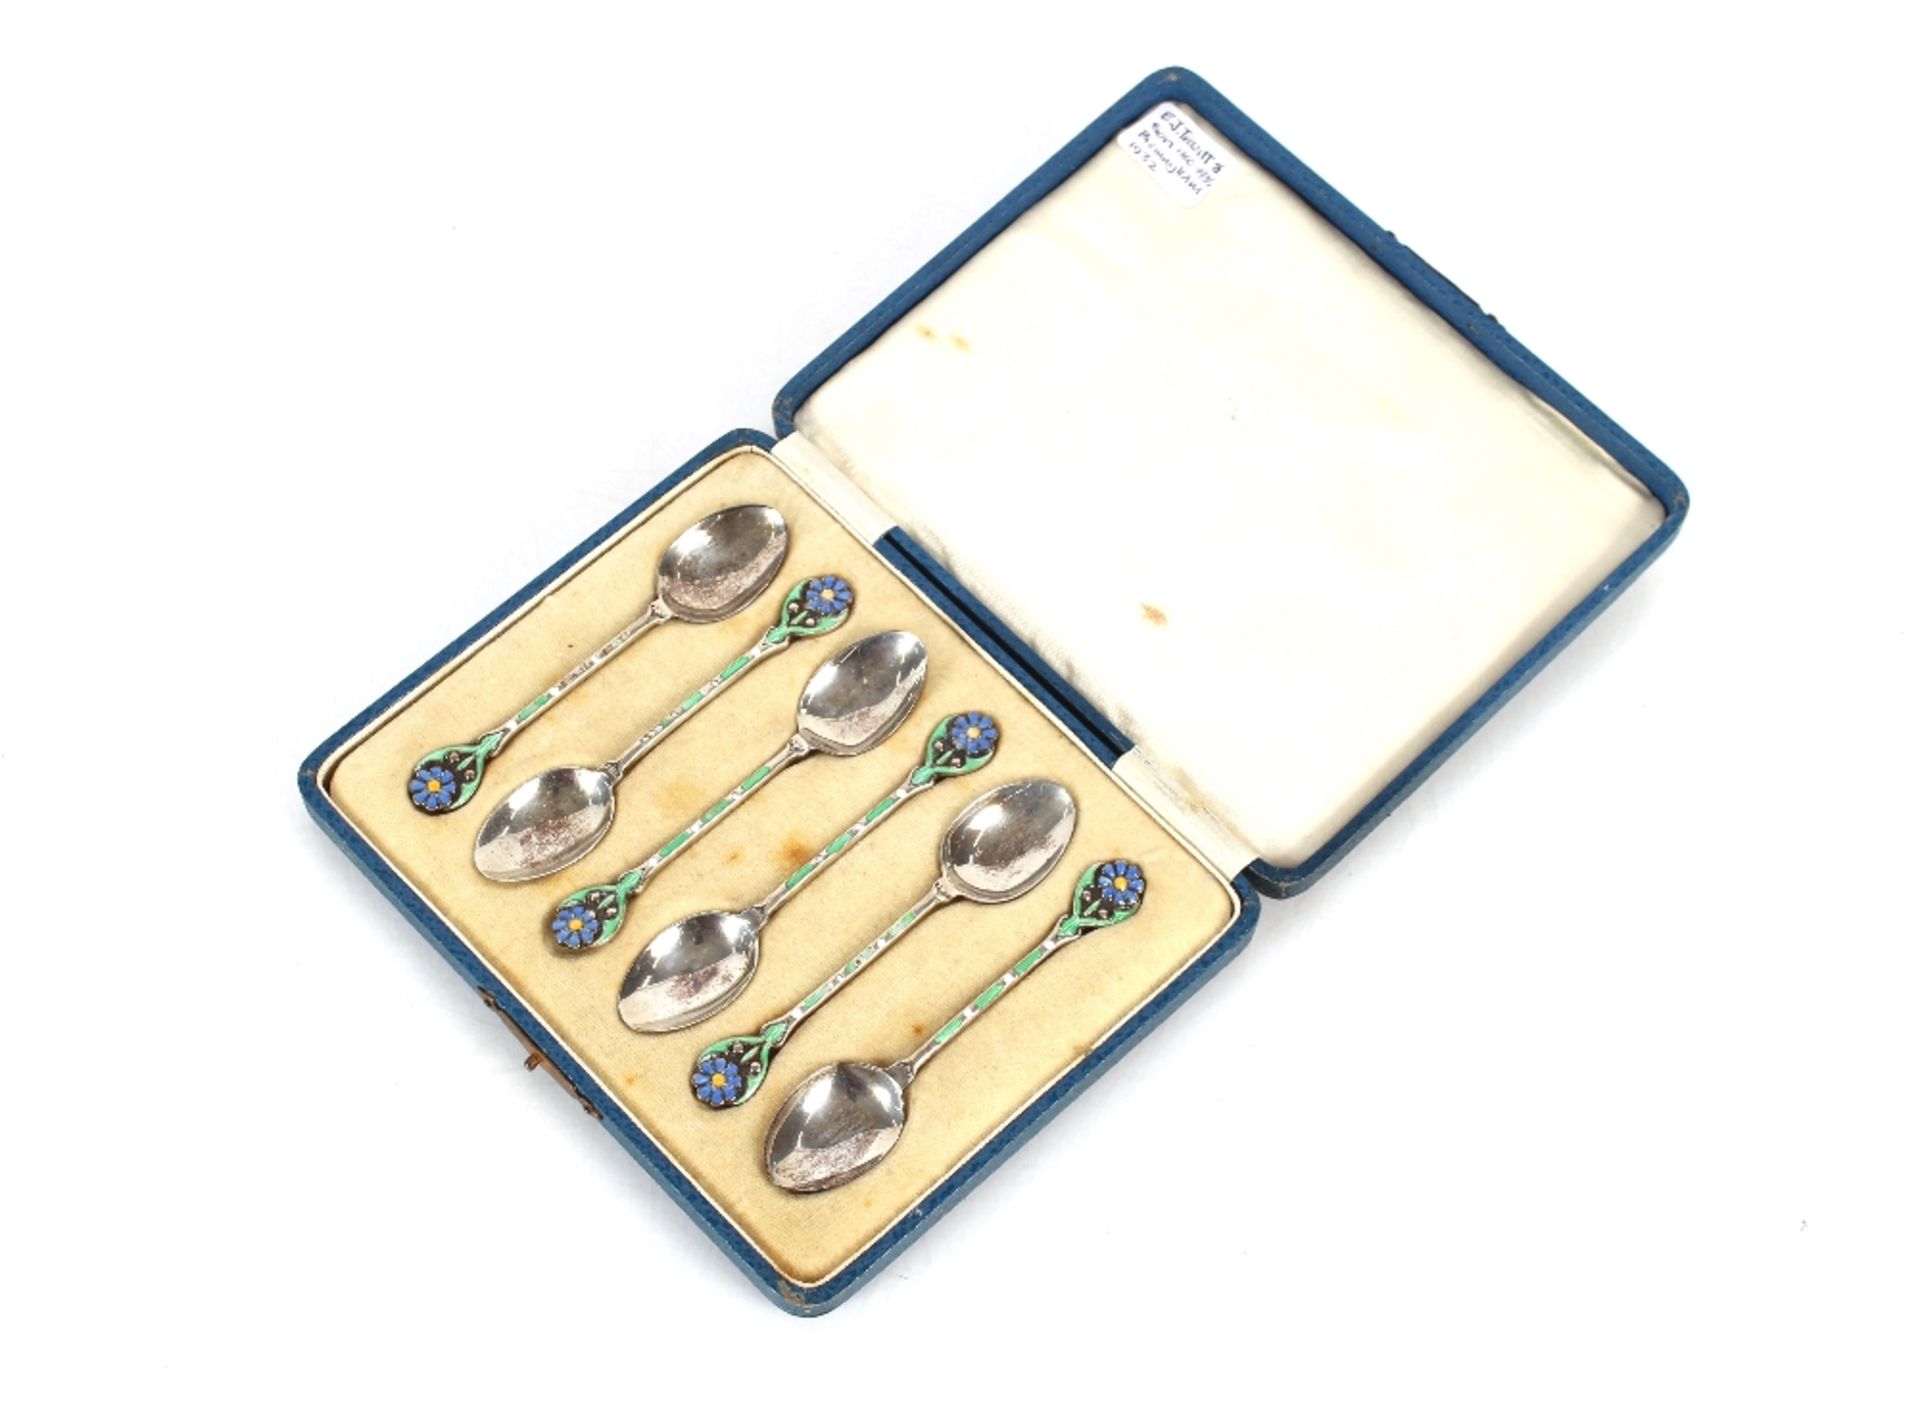 A cased set of silver and enamel decorated teaspoons, by E.J. Trevit & Son, Birmingham 1932